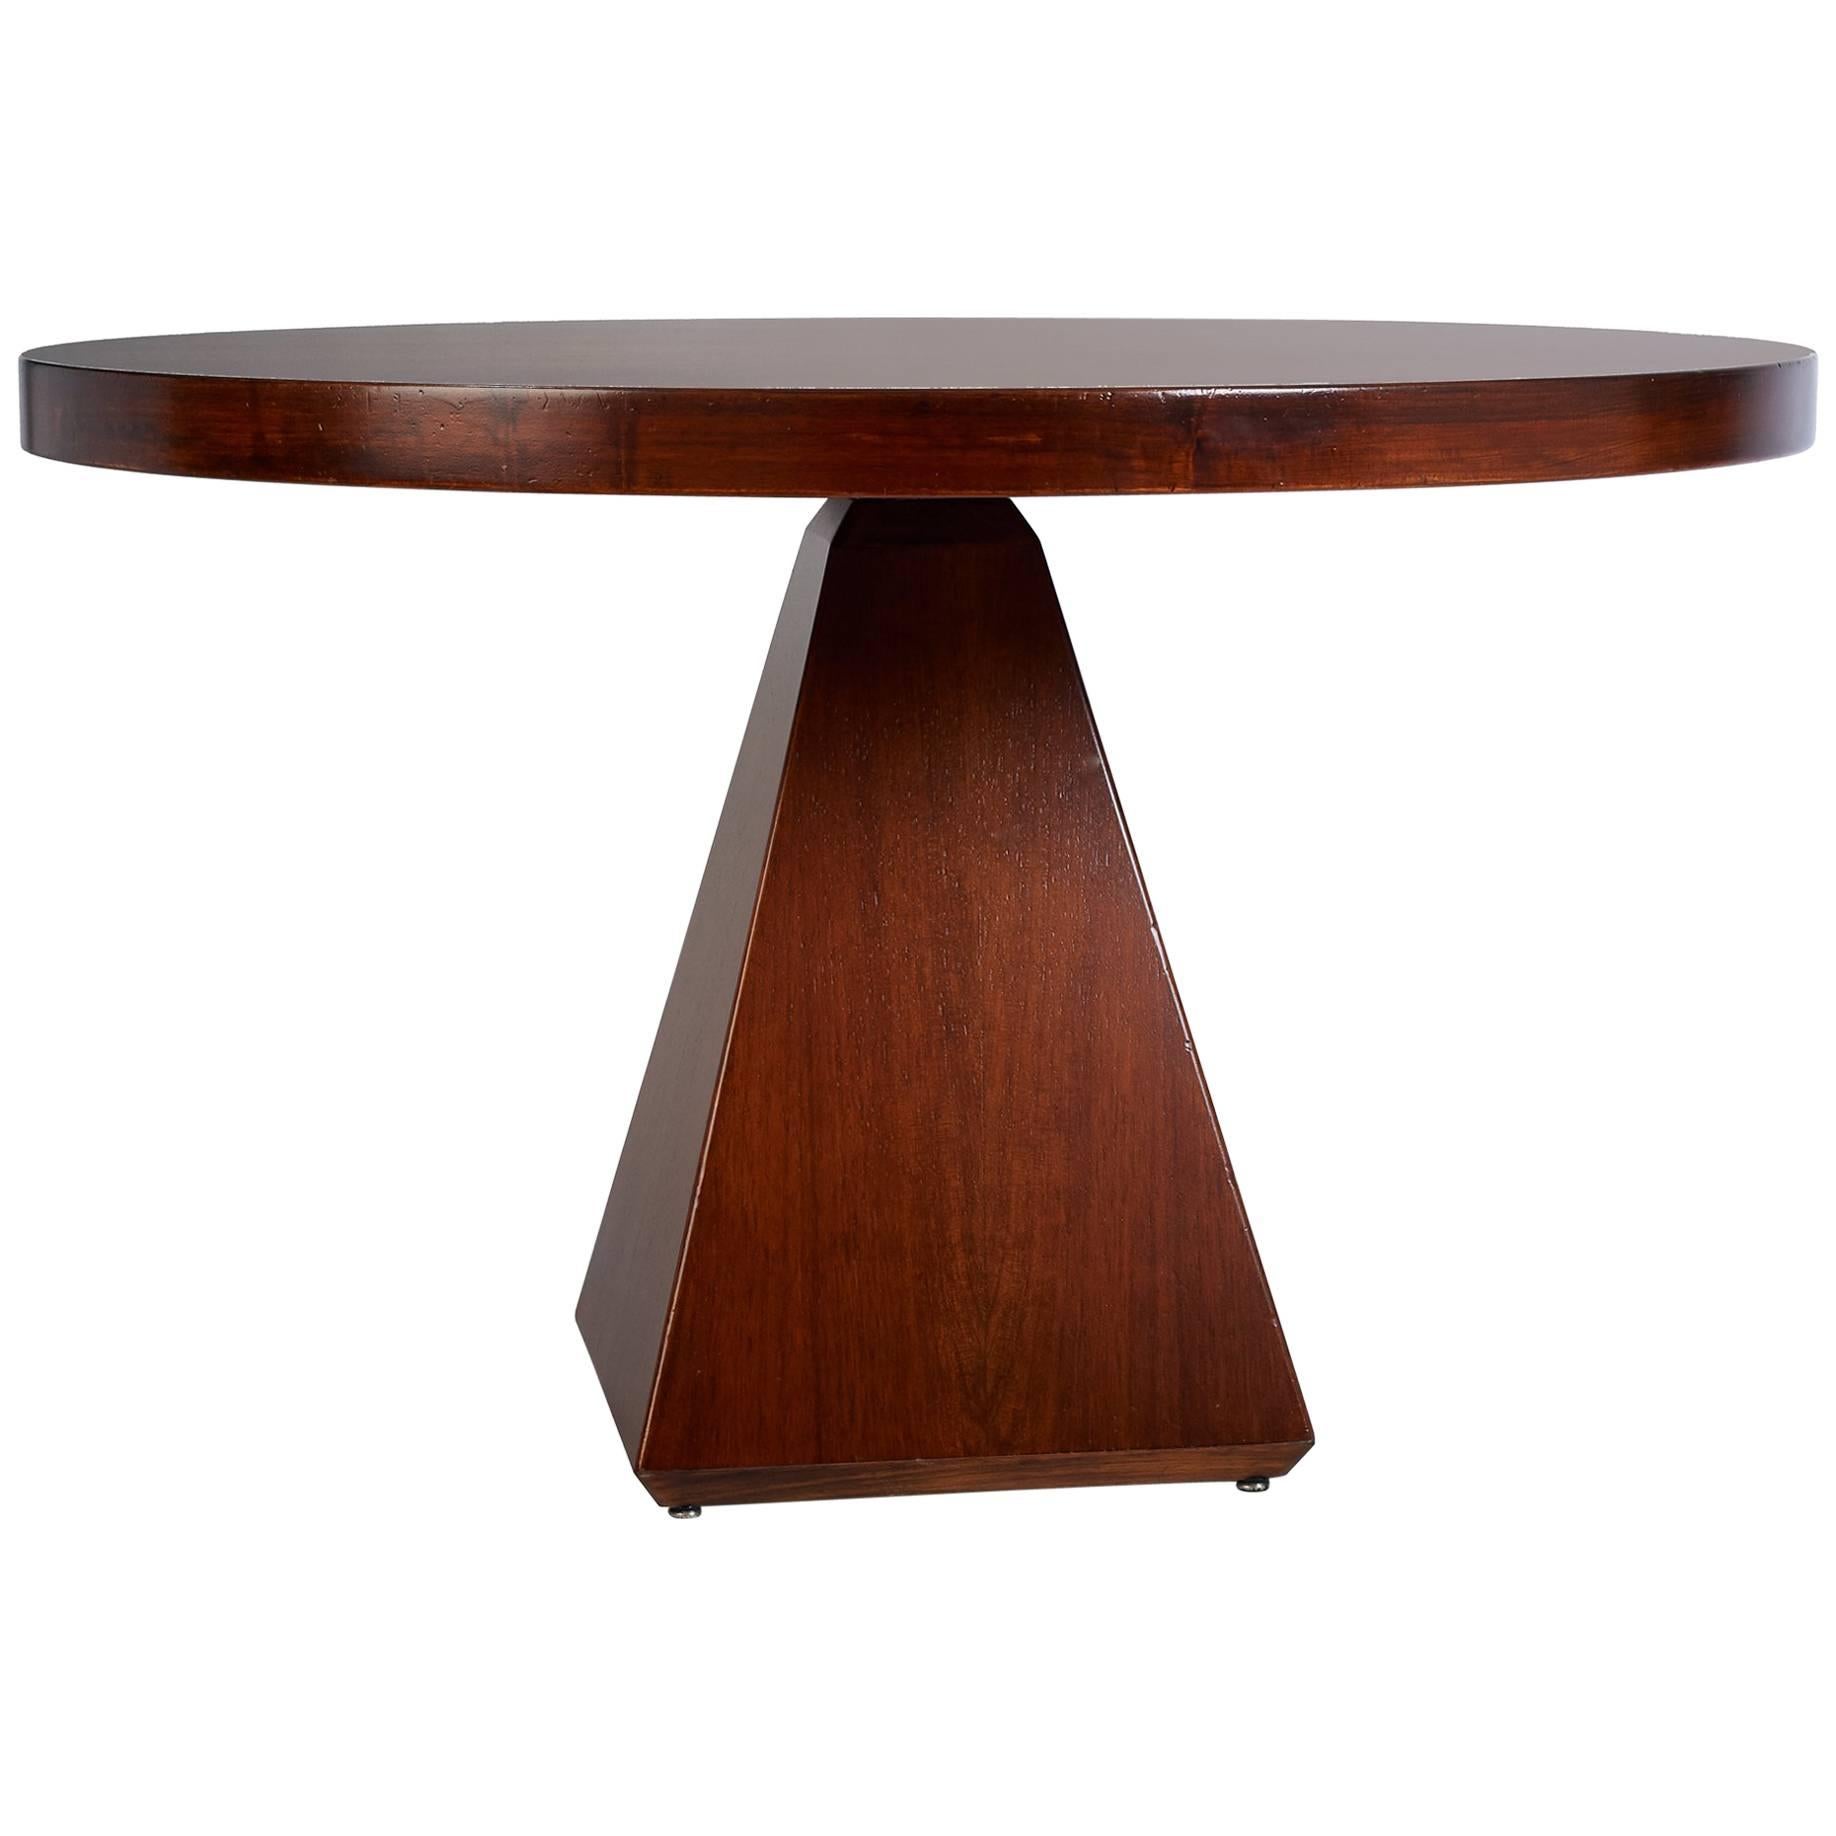 Vittorio Introini (1935 - 2023)

A striking geometric dining table by Milanese architect and designer Vittorio Introini, for Saporiti. With a thick round top resting on a dramatic pyramidal base with an elegantly beveled head and foot, in polished